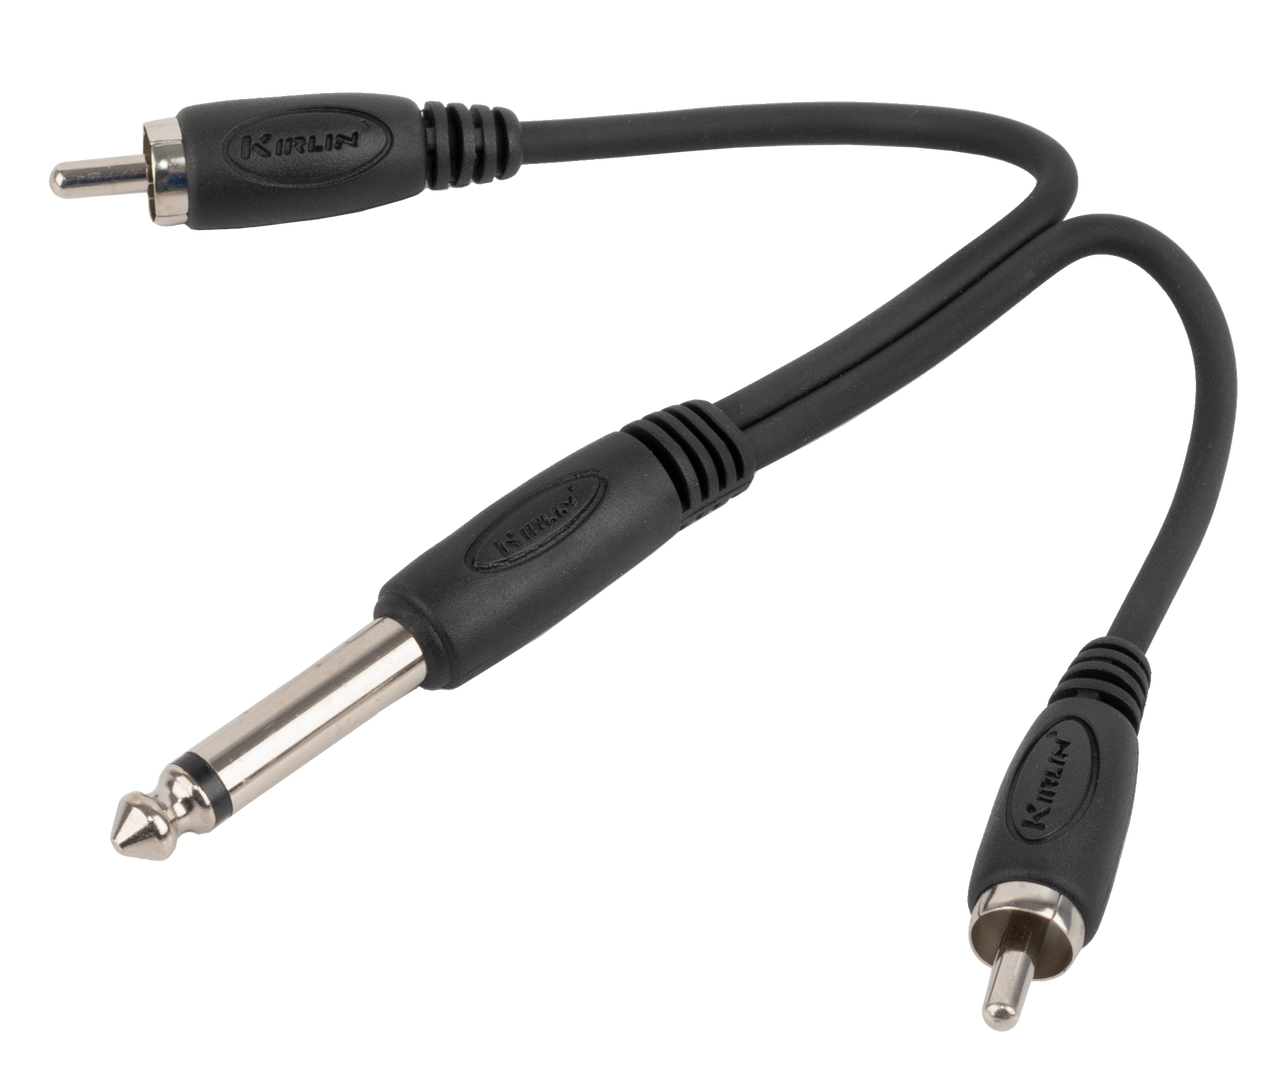 6 Inch Audio Cable